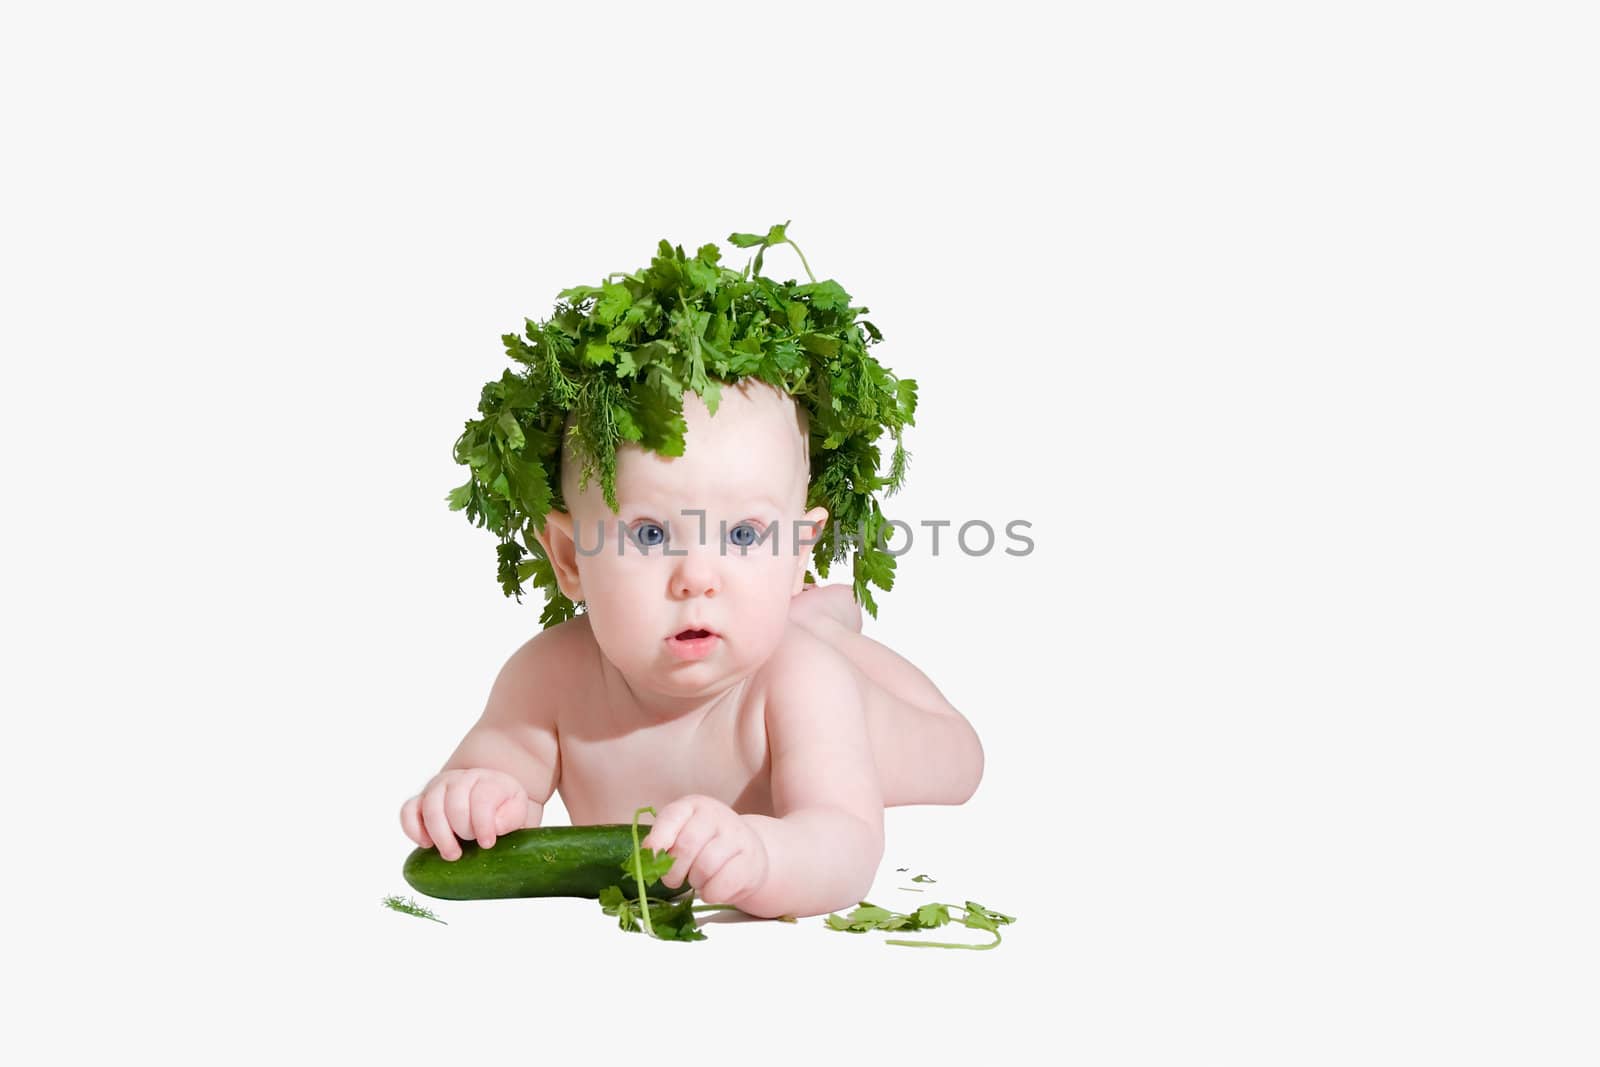 child with cucumber by vsurkov